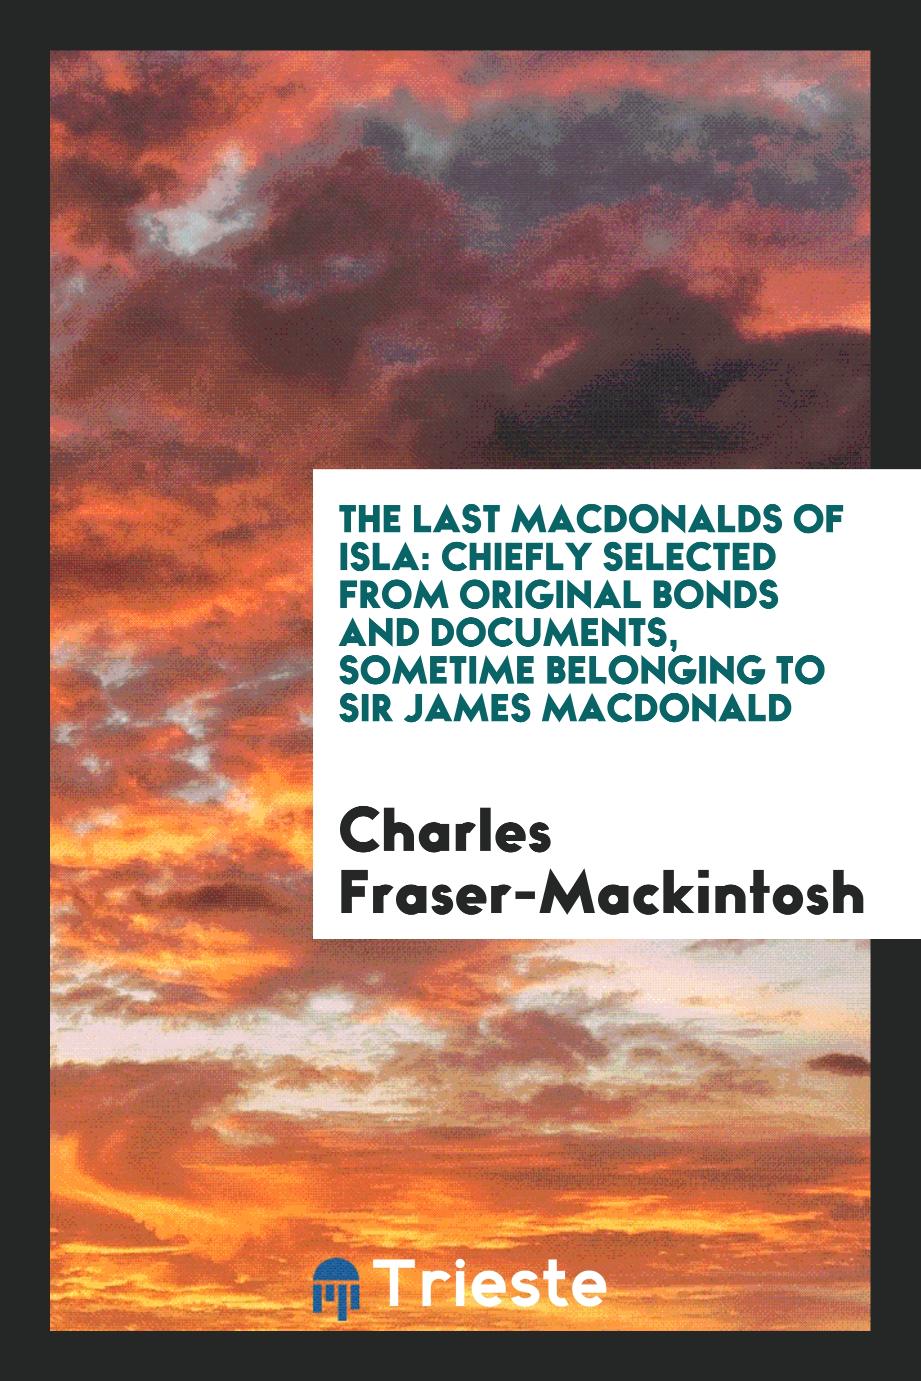 The Last Macdonalds of Isla: Chiefly Selected from Original Bonds and Documents, Sometime Belonging to Sir James Macdonald